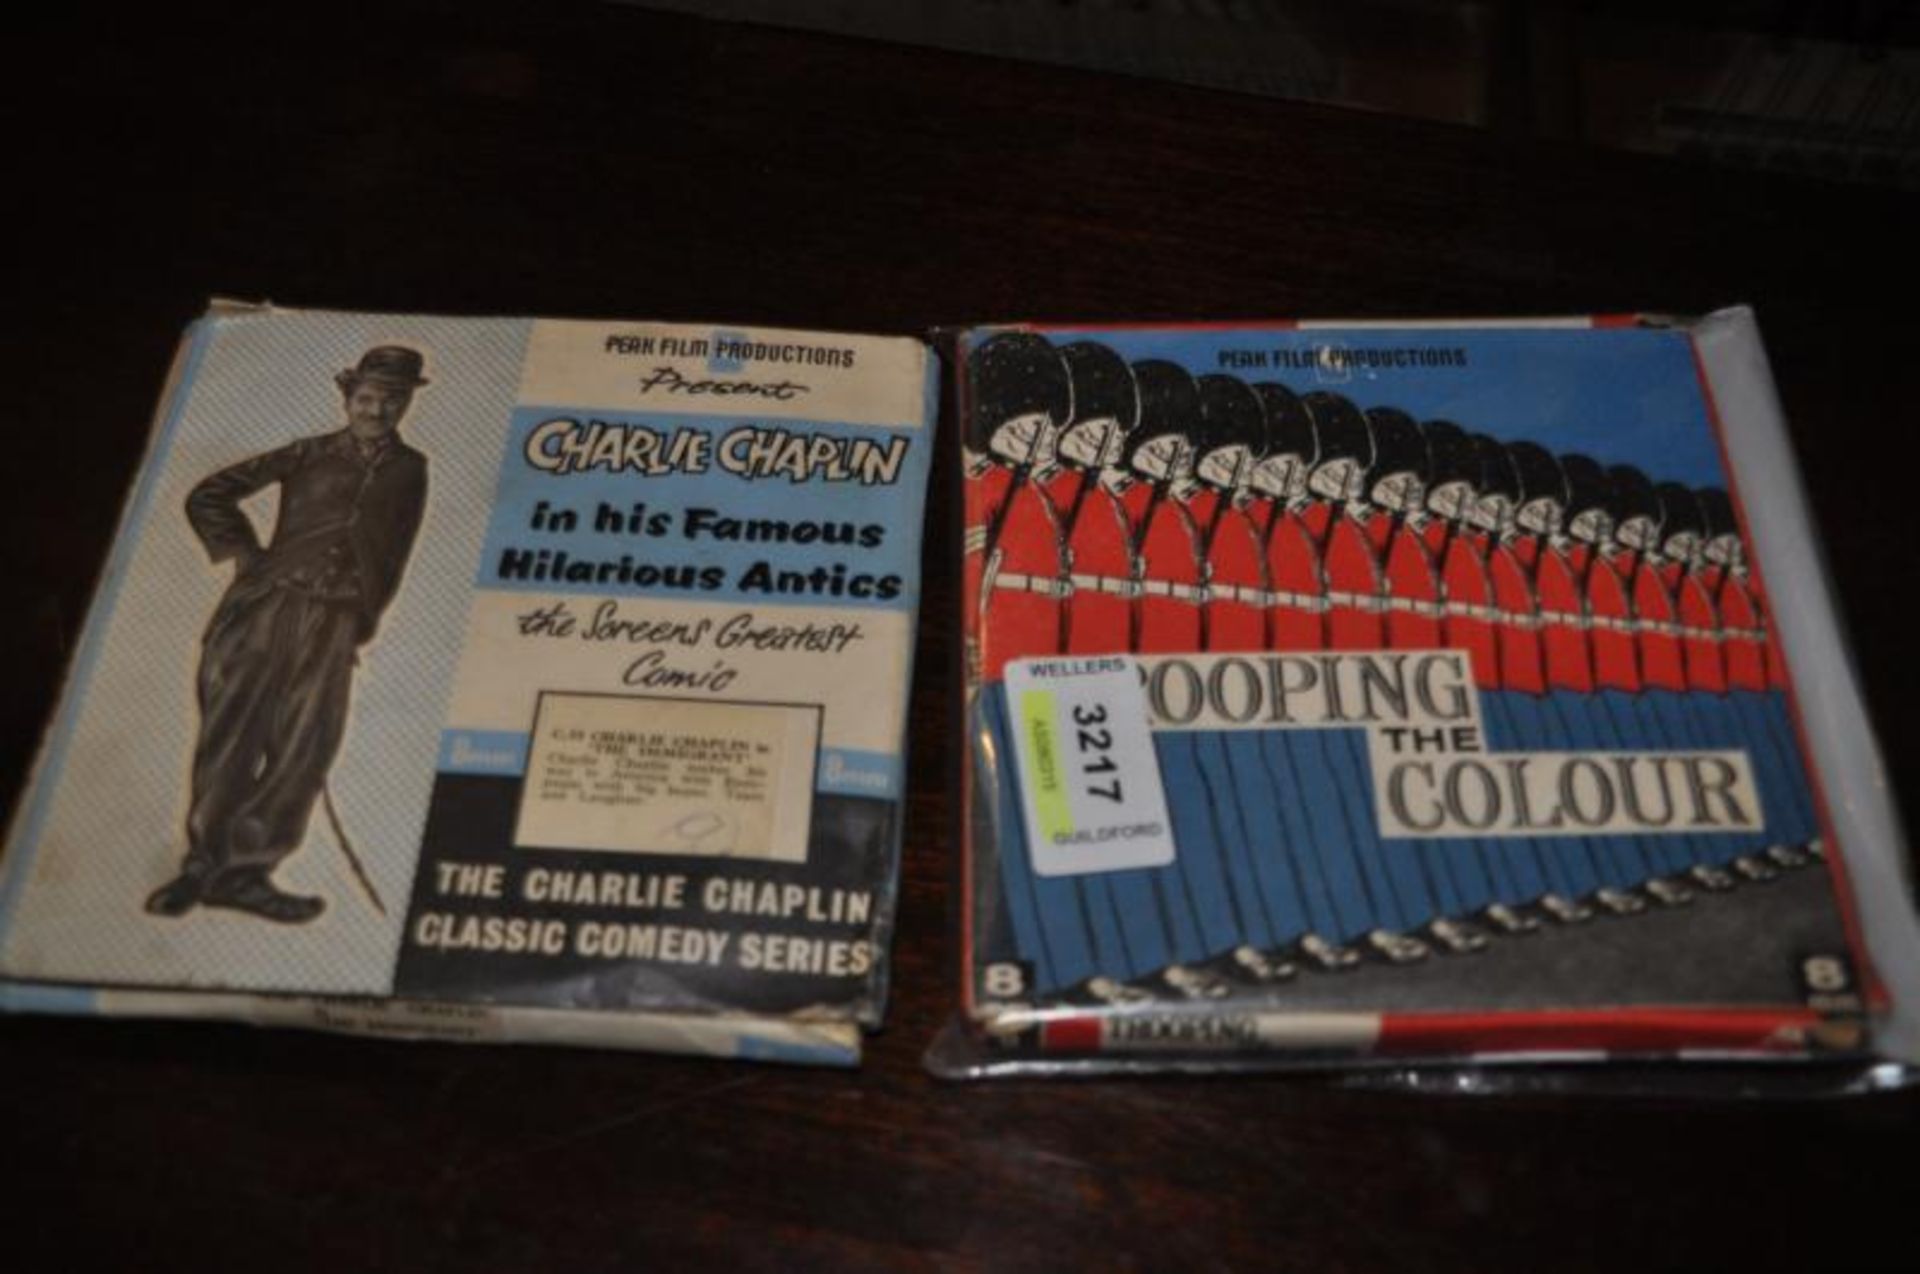 Two 8mm cine films c1955, one of Charlie Chaplin 'The Immigrant' and one of Trooping of the Colour